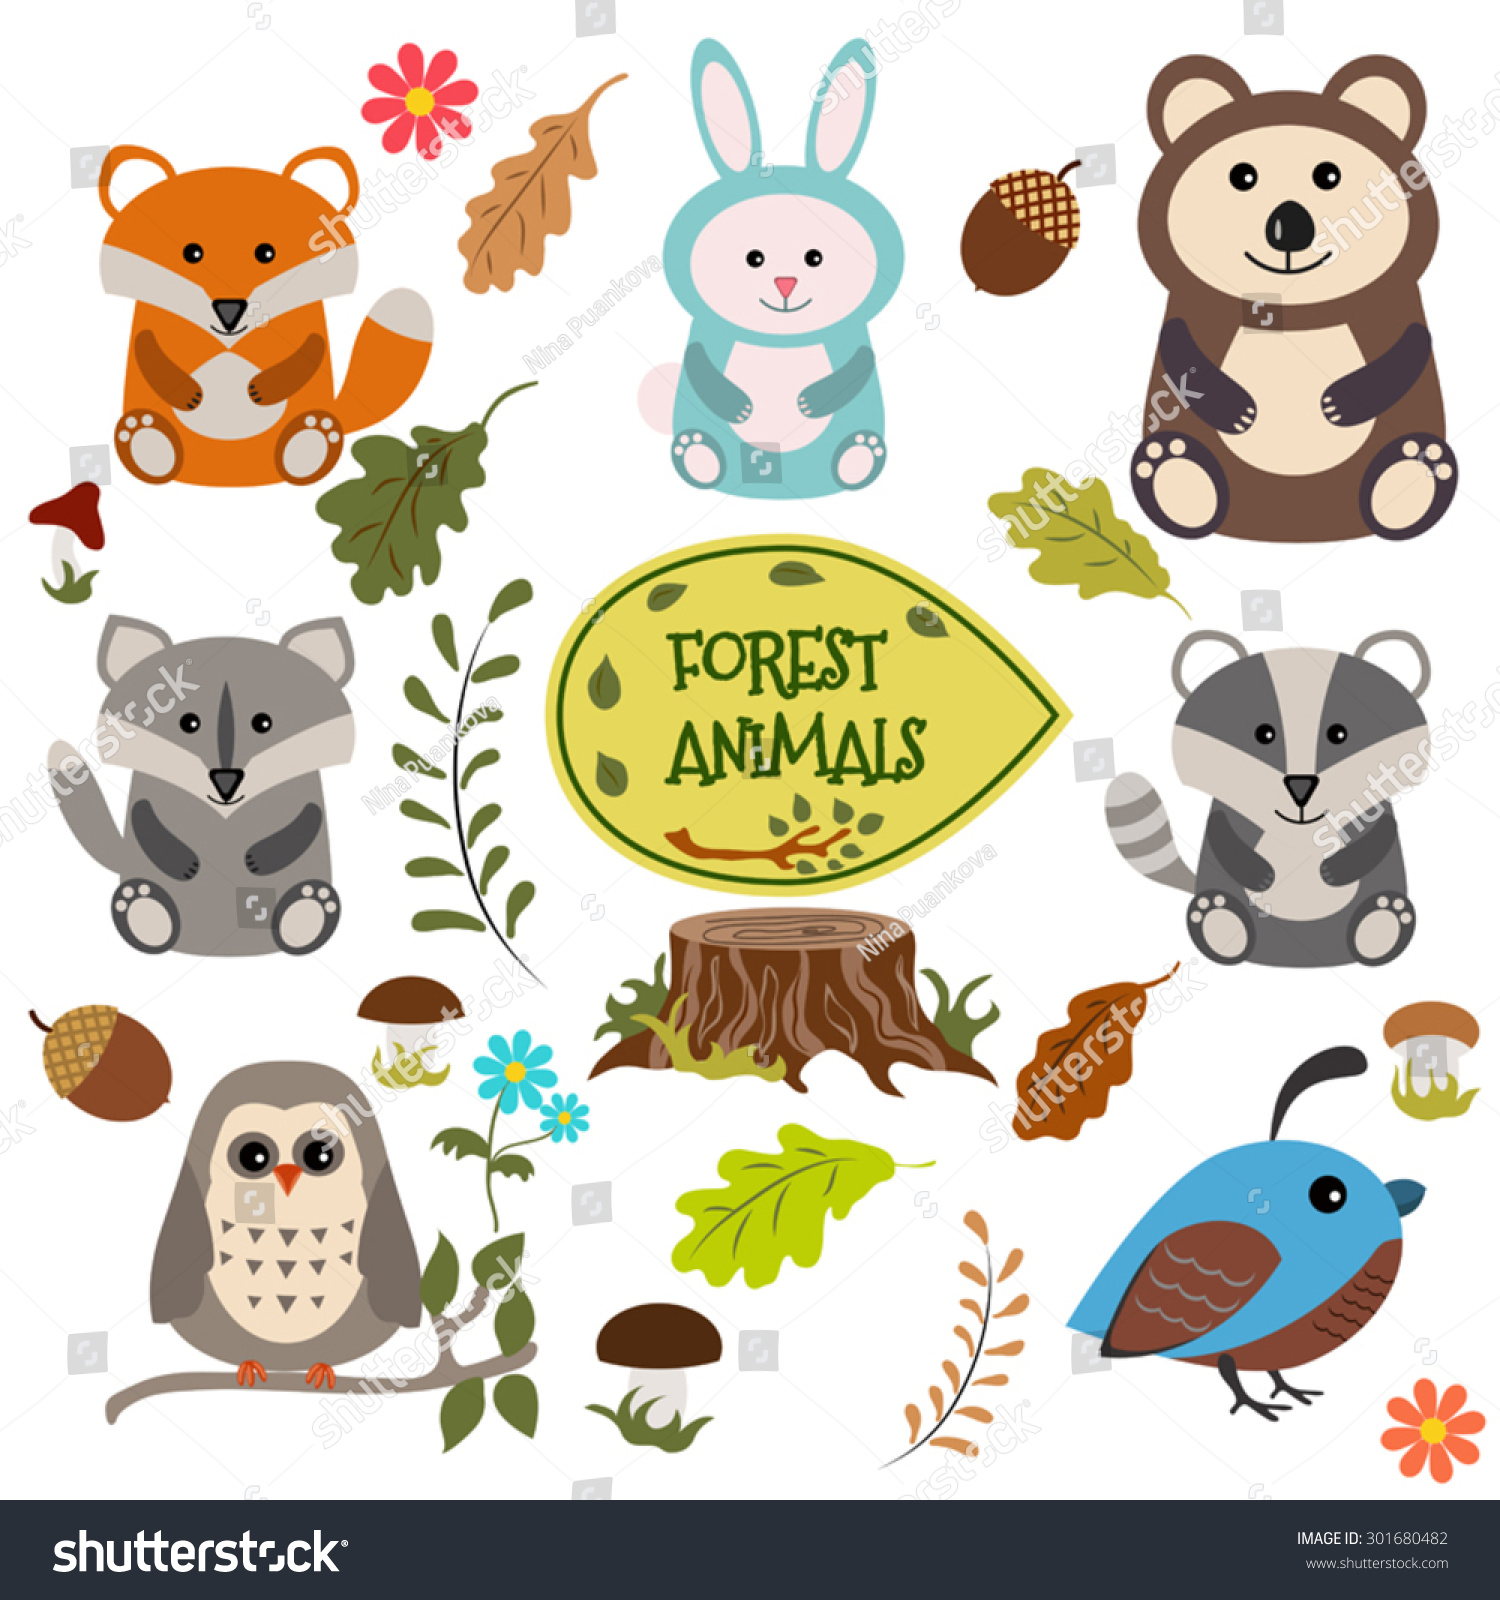 Forest Animals Vector Set Of Icons And Illustrations. - 301680482